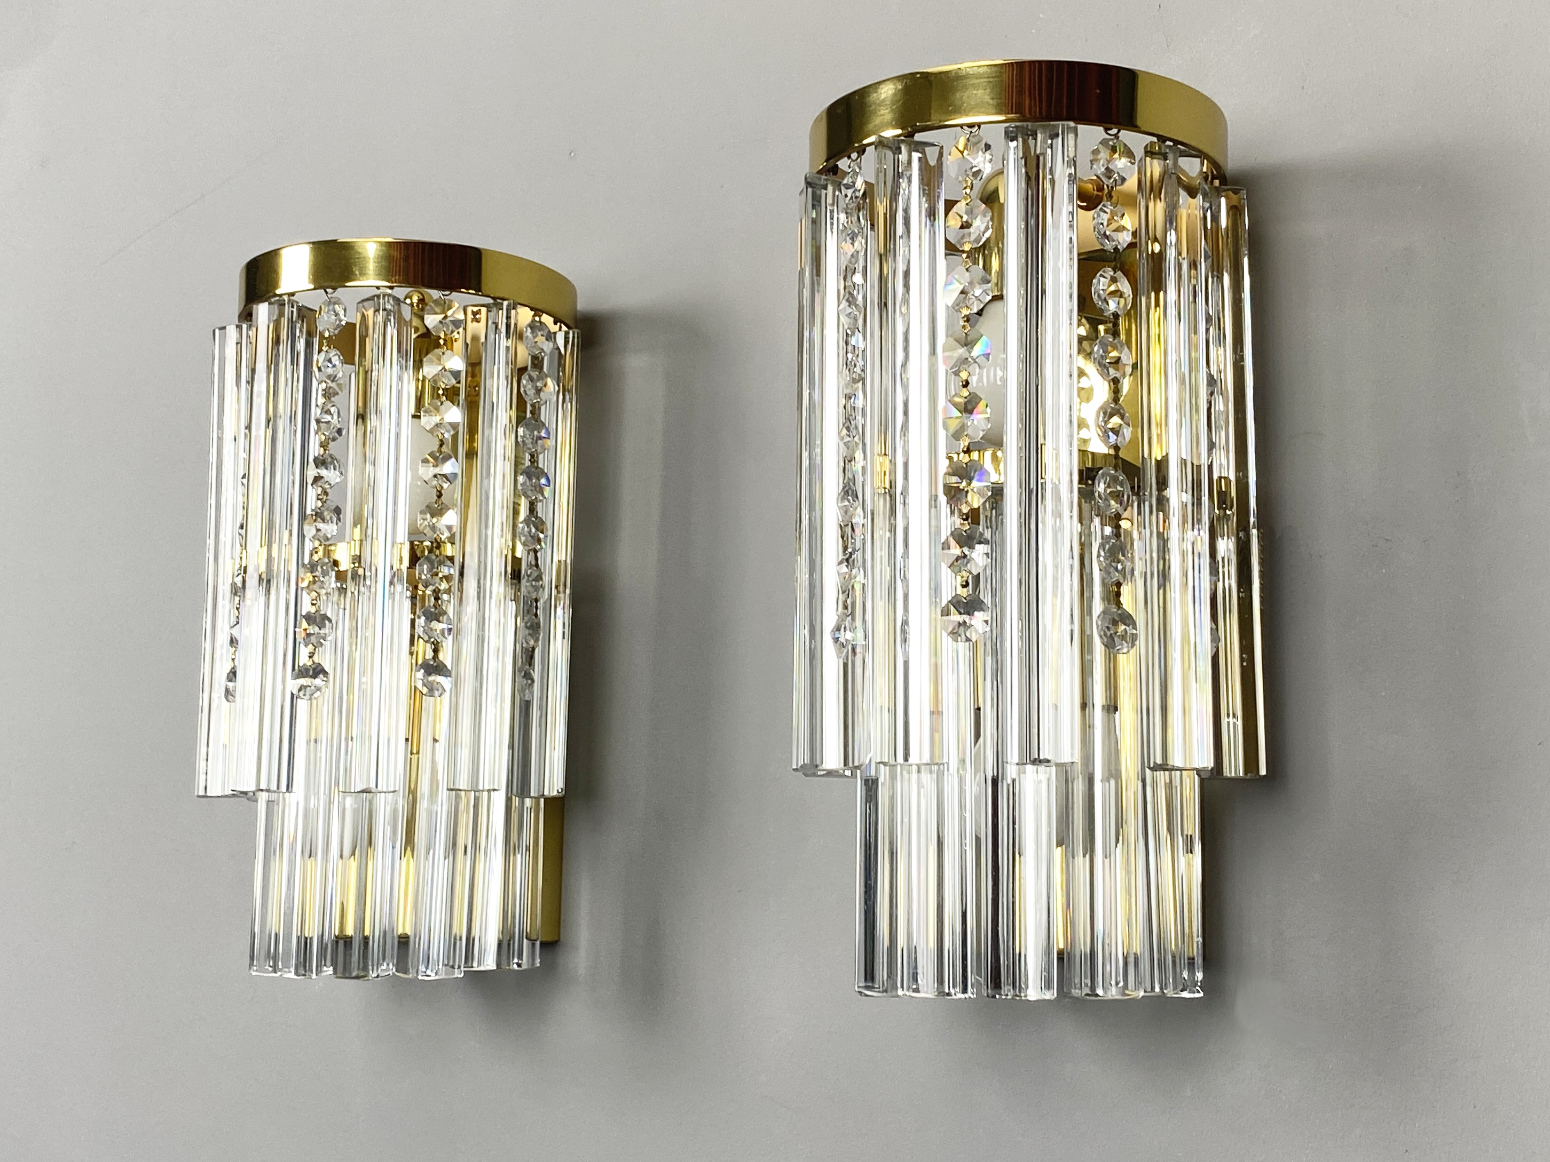 Pair of Sconces / Wall Lights by J.T. Kalmar Vienna with Murano Crystal Glass Hanging, Austria, 1970s. Each Sconce has 22 Crystal Parts.